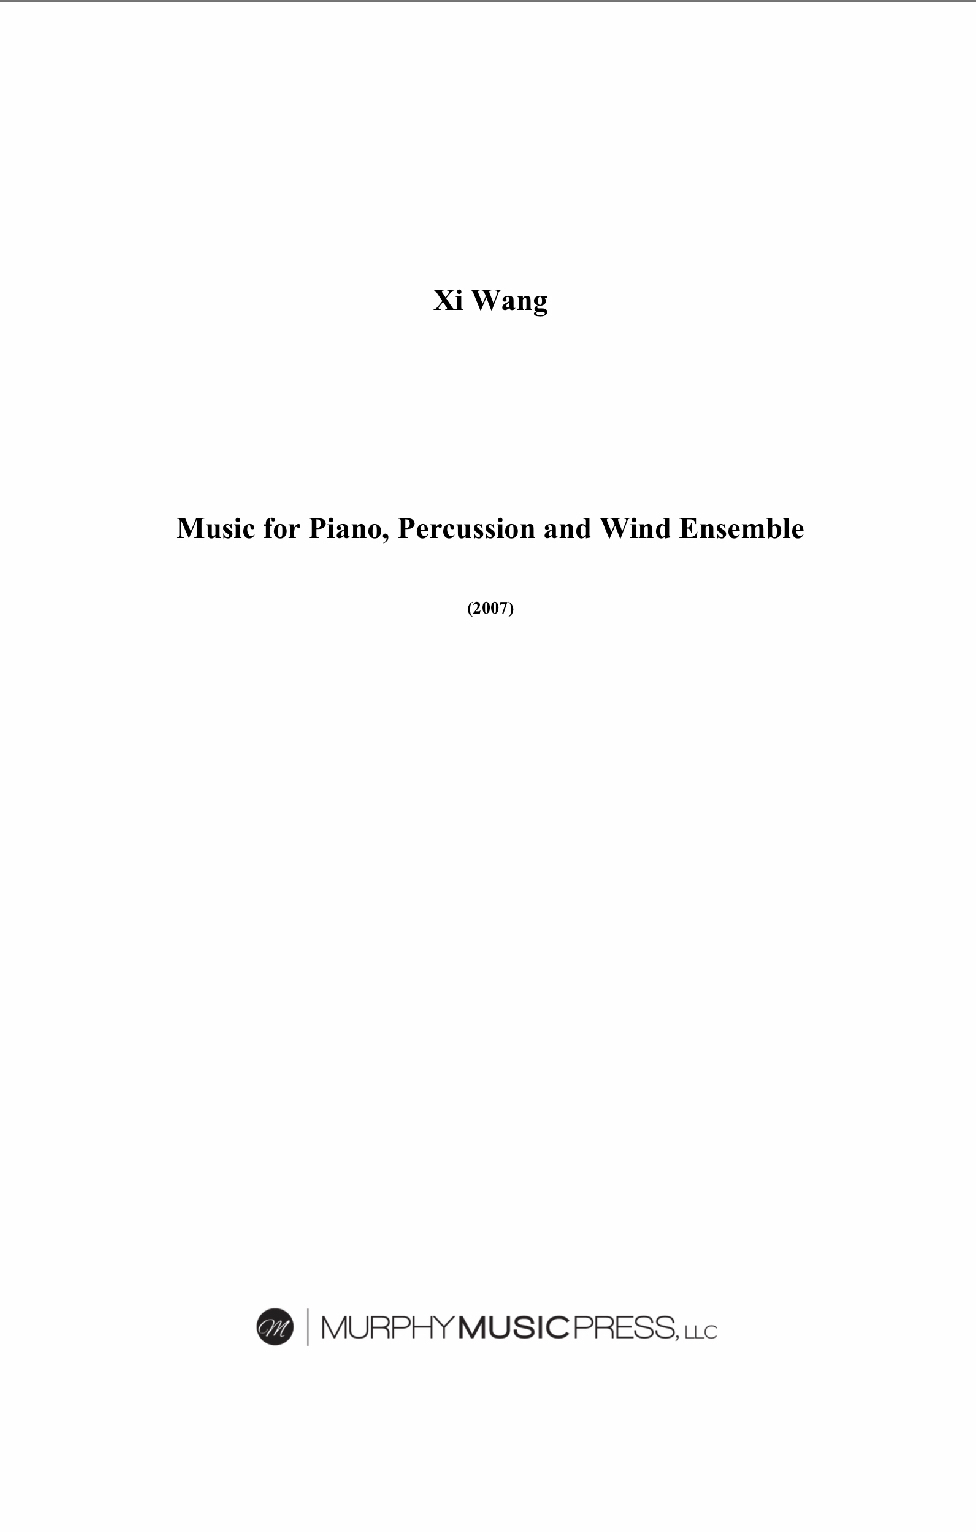 Music For Piano, Percussion And Wind Ensemble (Score Only) by Xi Wang